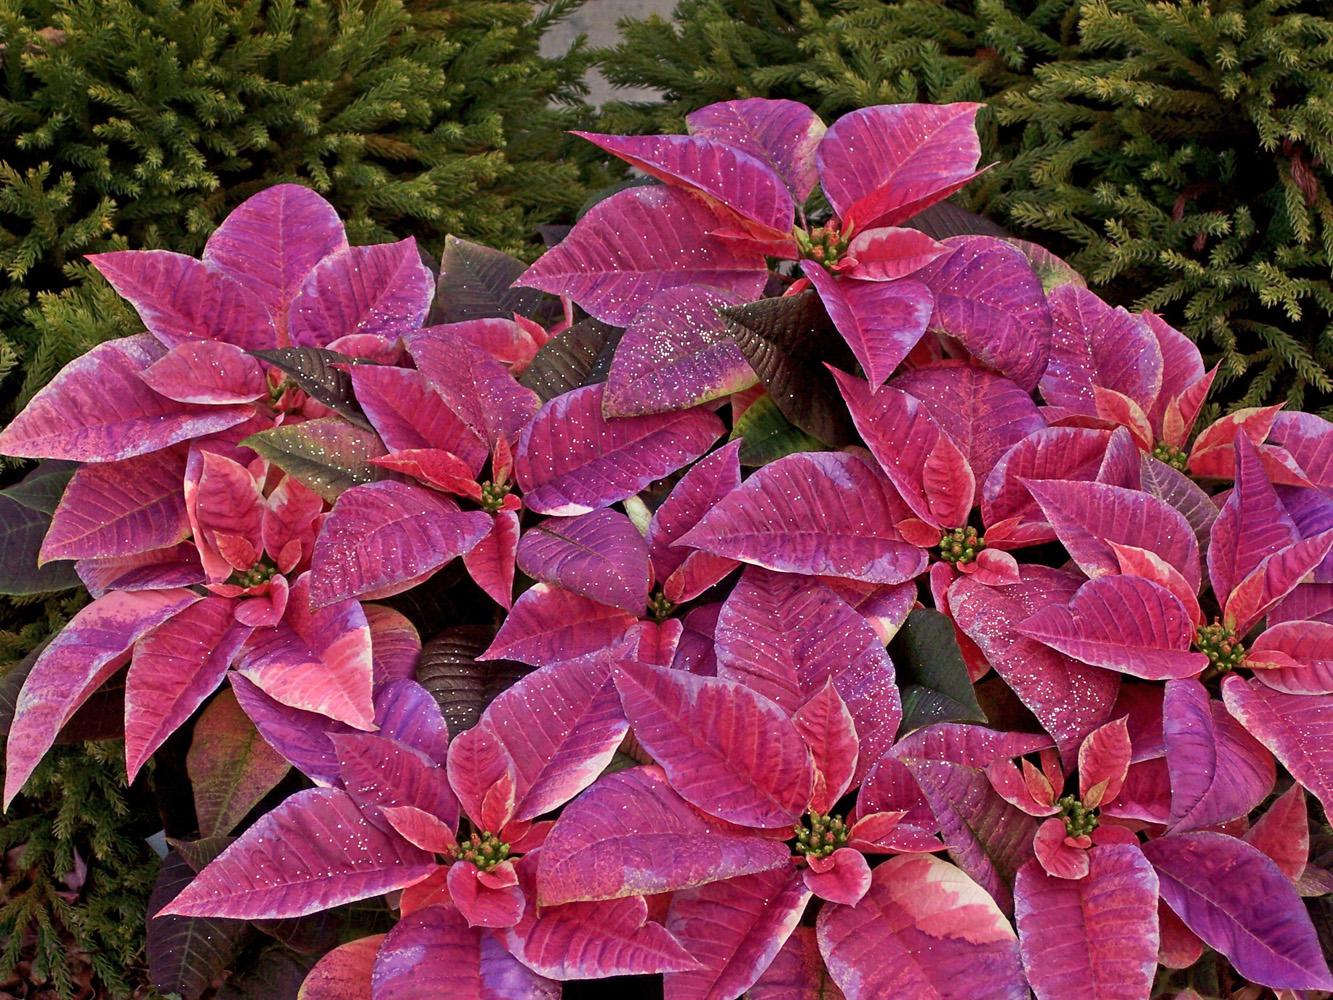 This lilac painted poinsettia can add to your Christmas decorations, then with some extra care, can still look good for Easter. Try it with some pink eggs underneath or surrounding white Easter lilies.